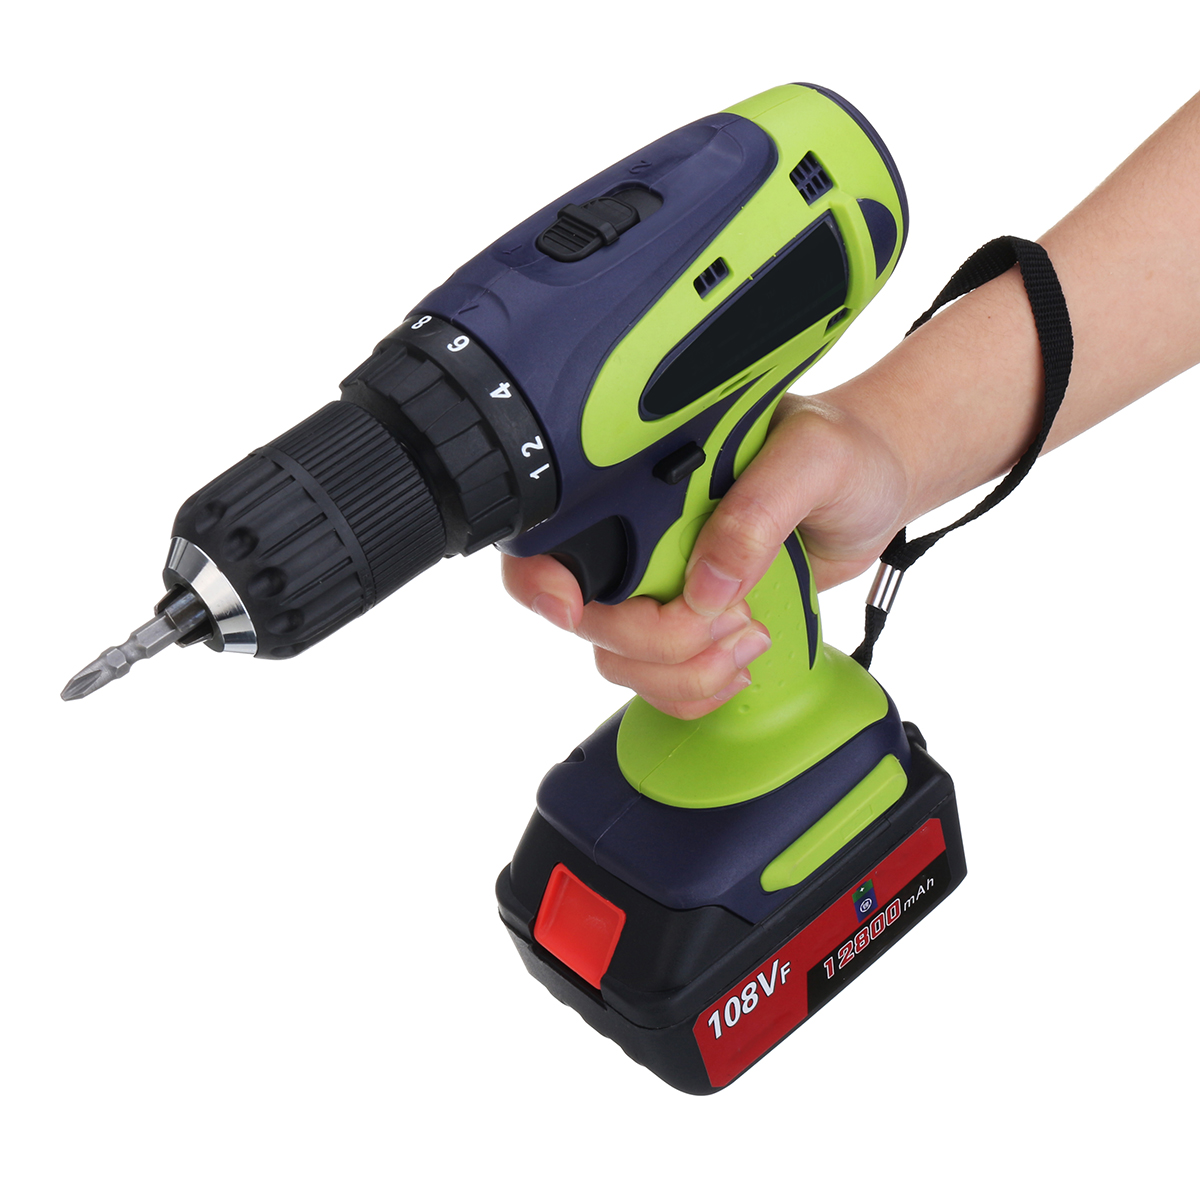 108VF-12800mAh-Dual-Speed-Cordless-Drill-Multifunctional-High-Power-Household-Electric-Drills-W-Acce-1457224-7